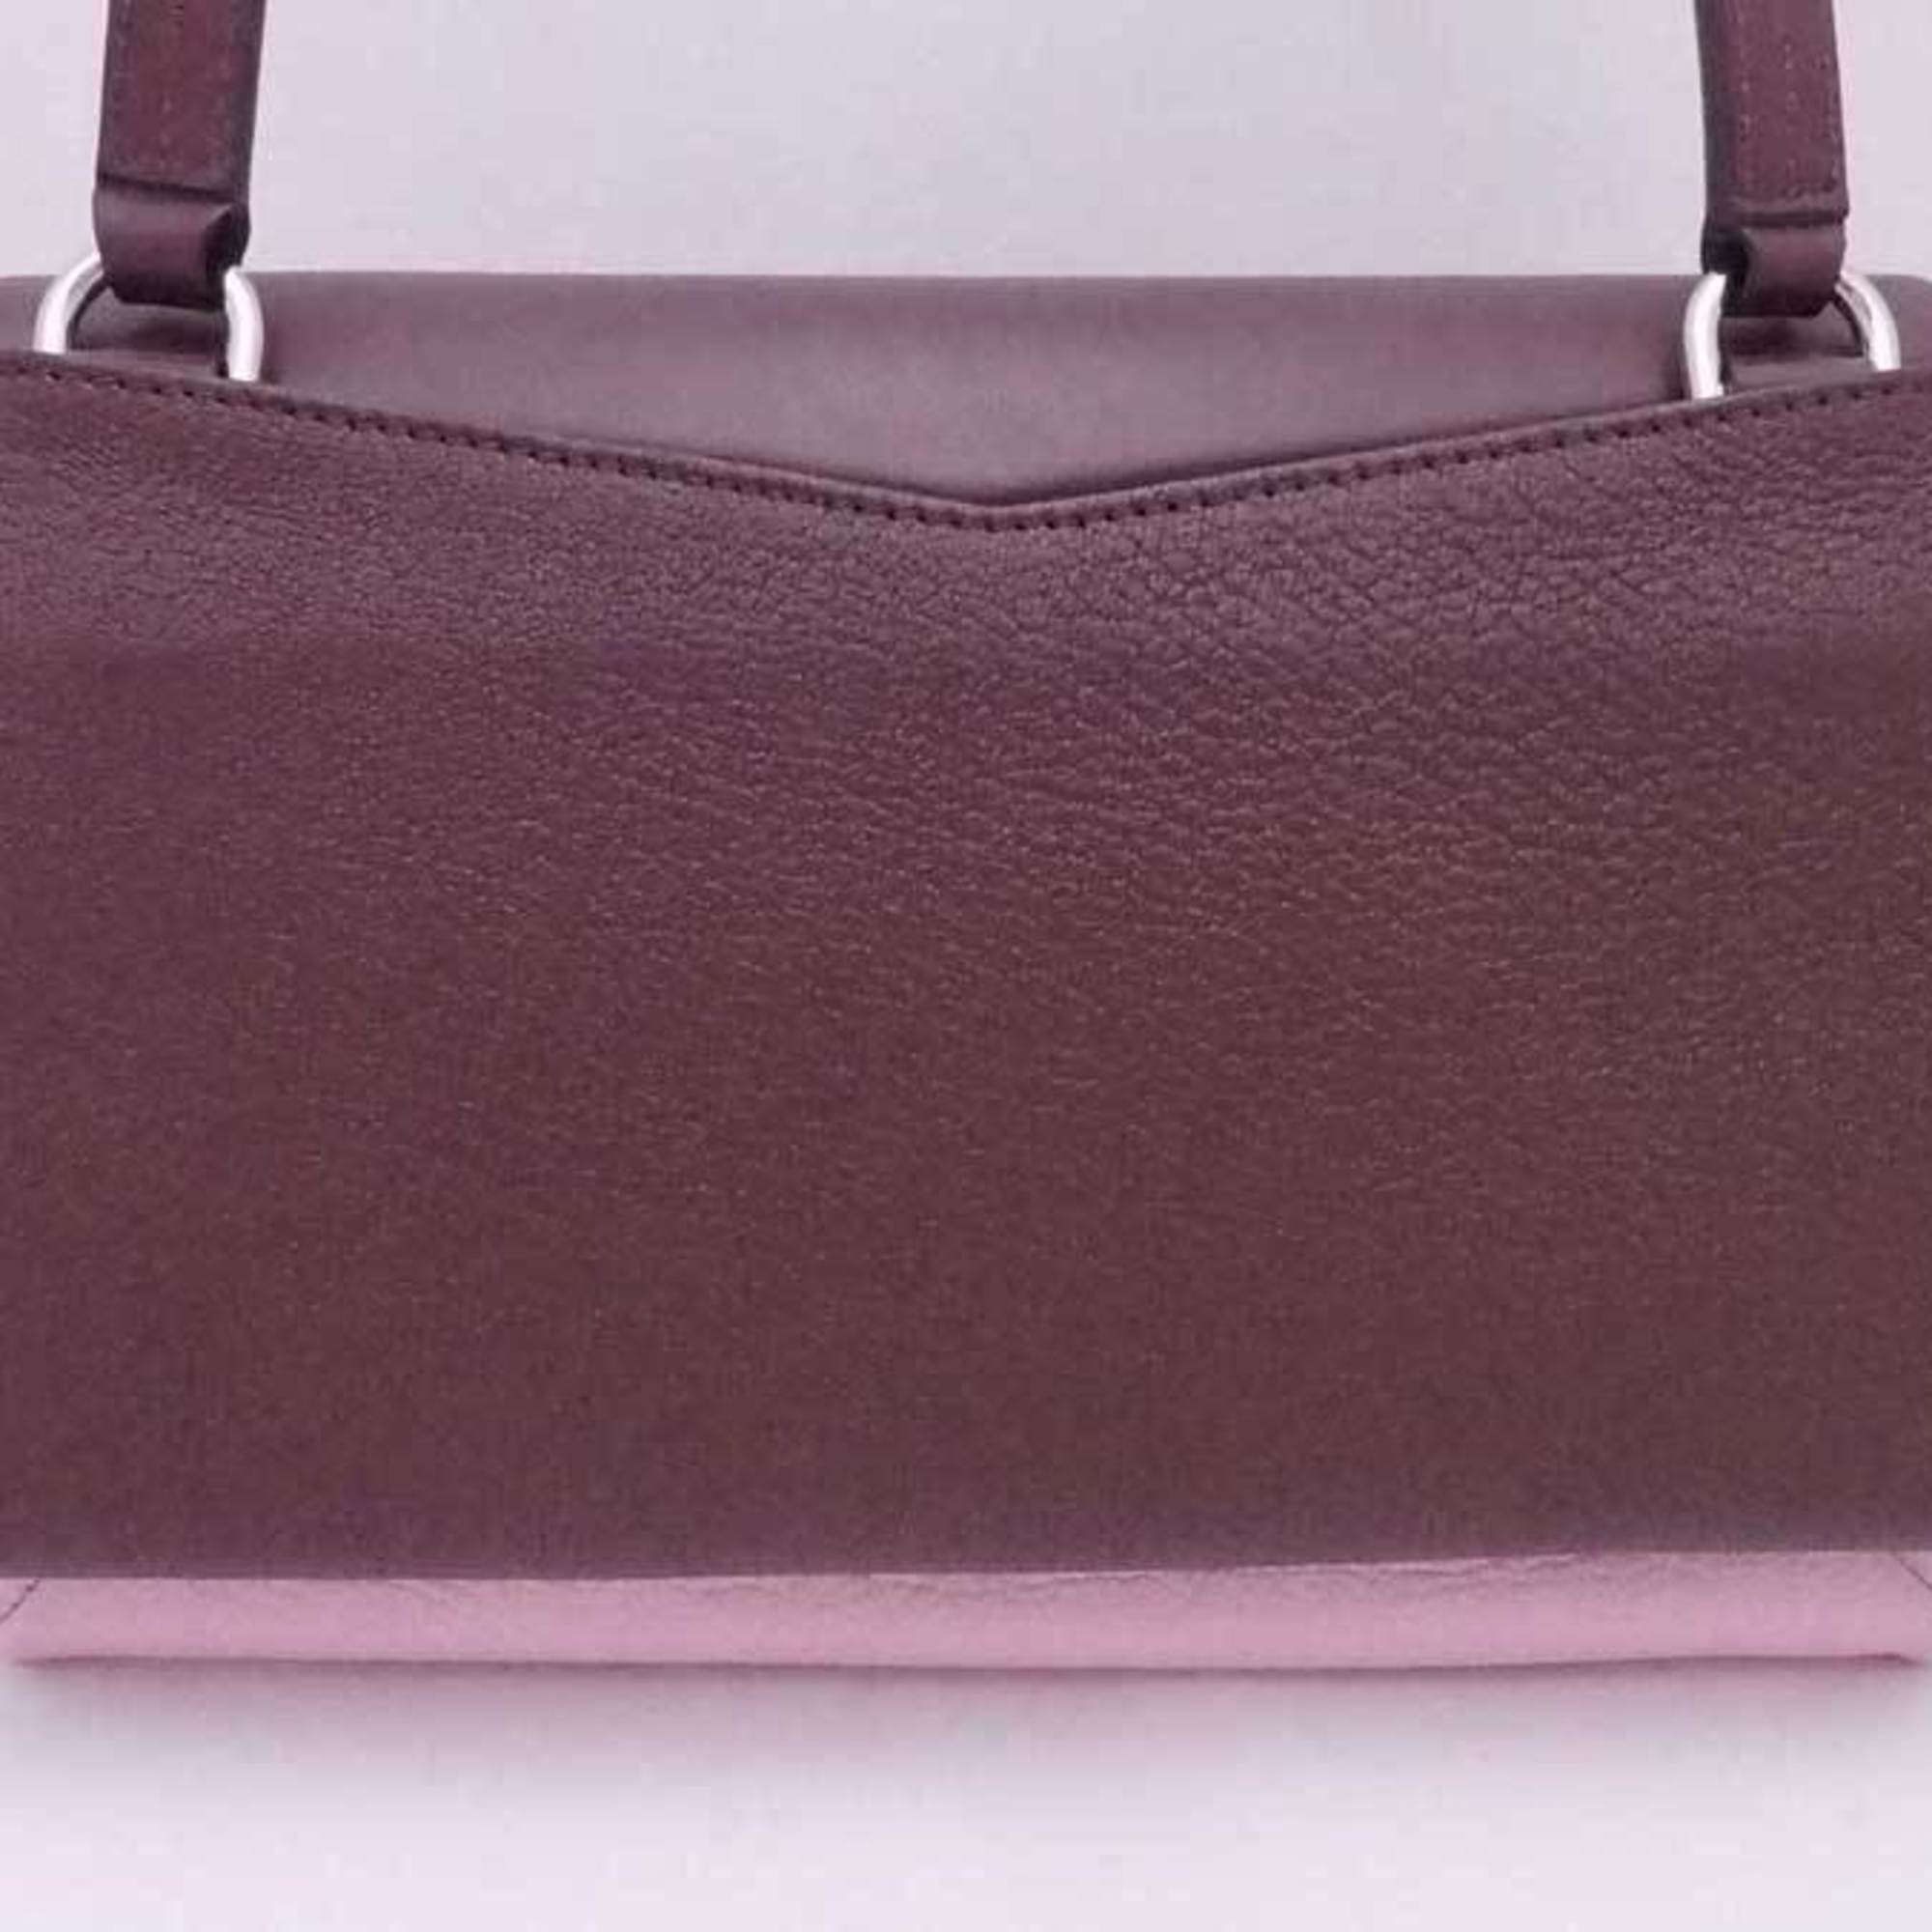 Givenchy GIVENCHY Crossbody Shoulder Bag Duet Leather Bordeaux x Pink White Women's